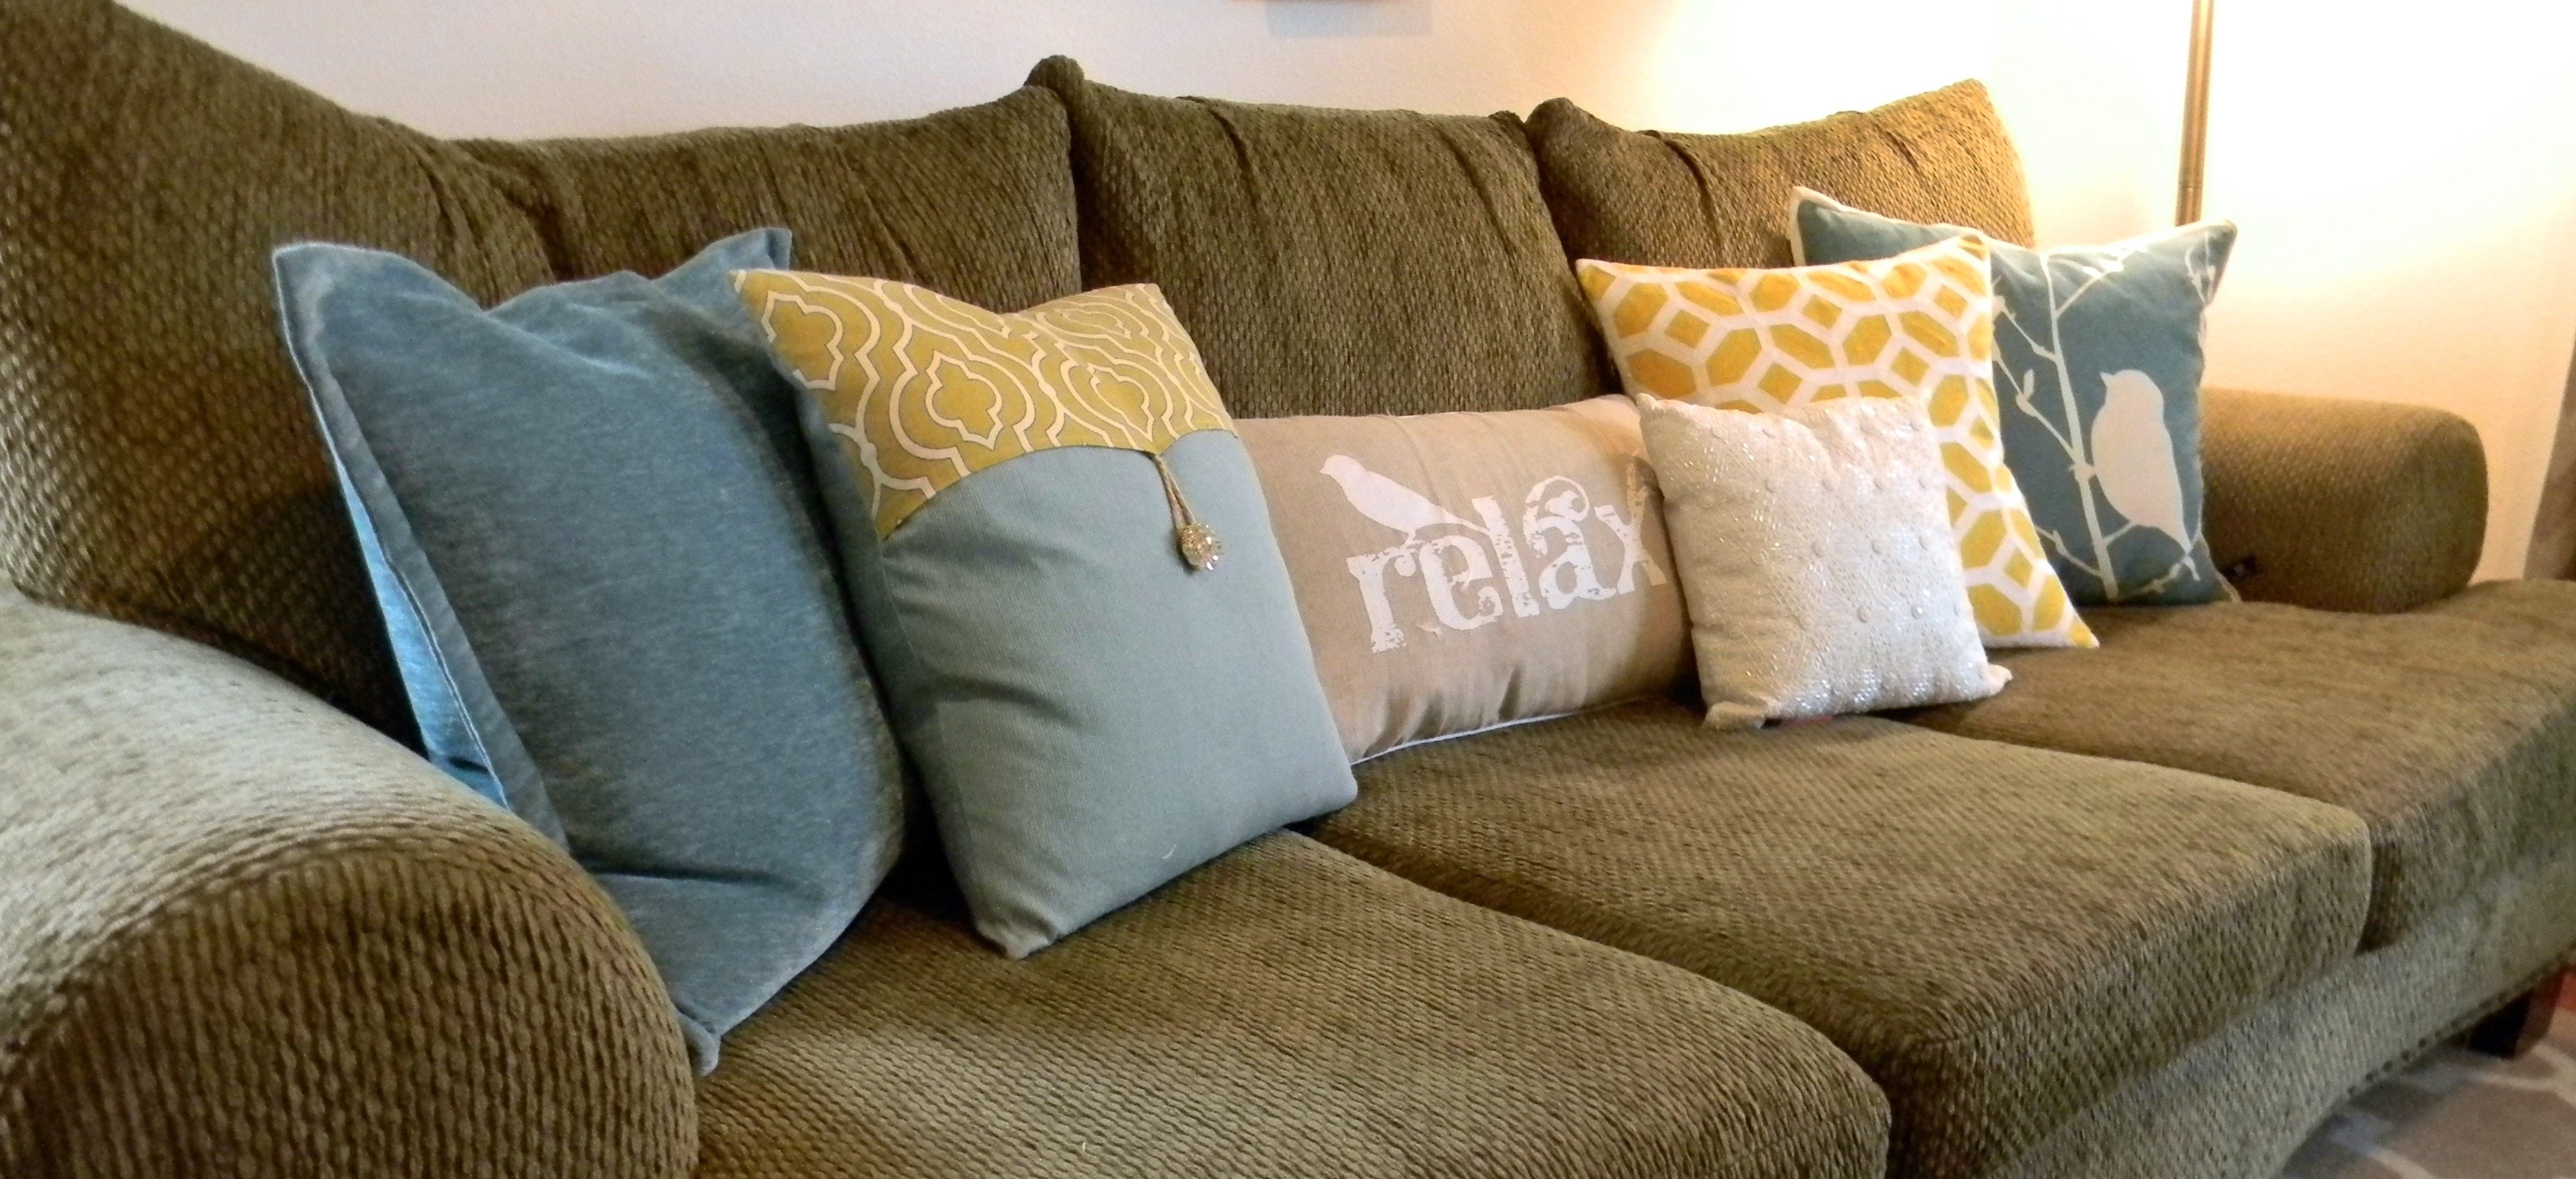 throw pillows for couch sofa or bed